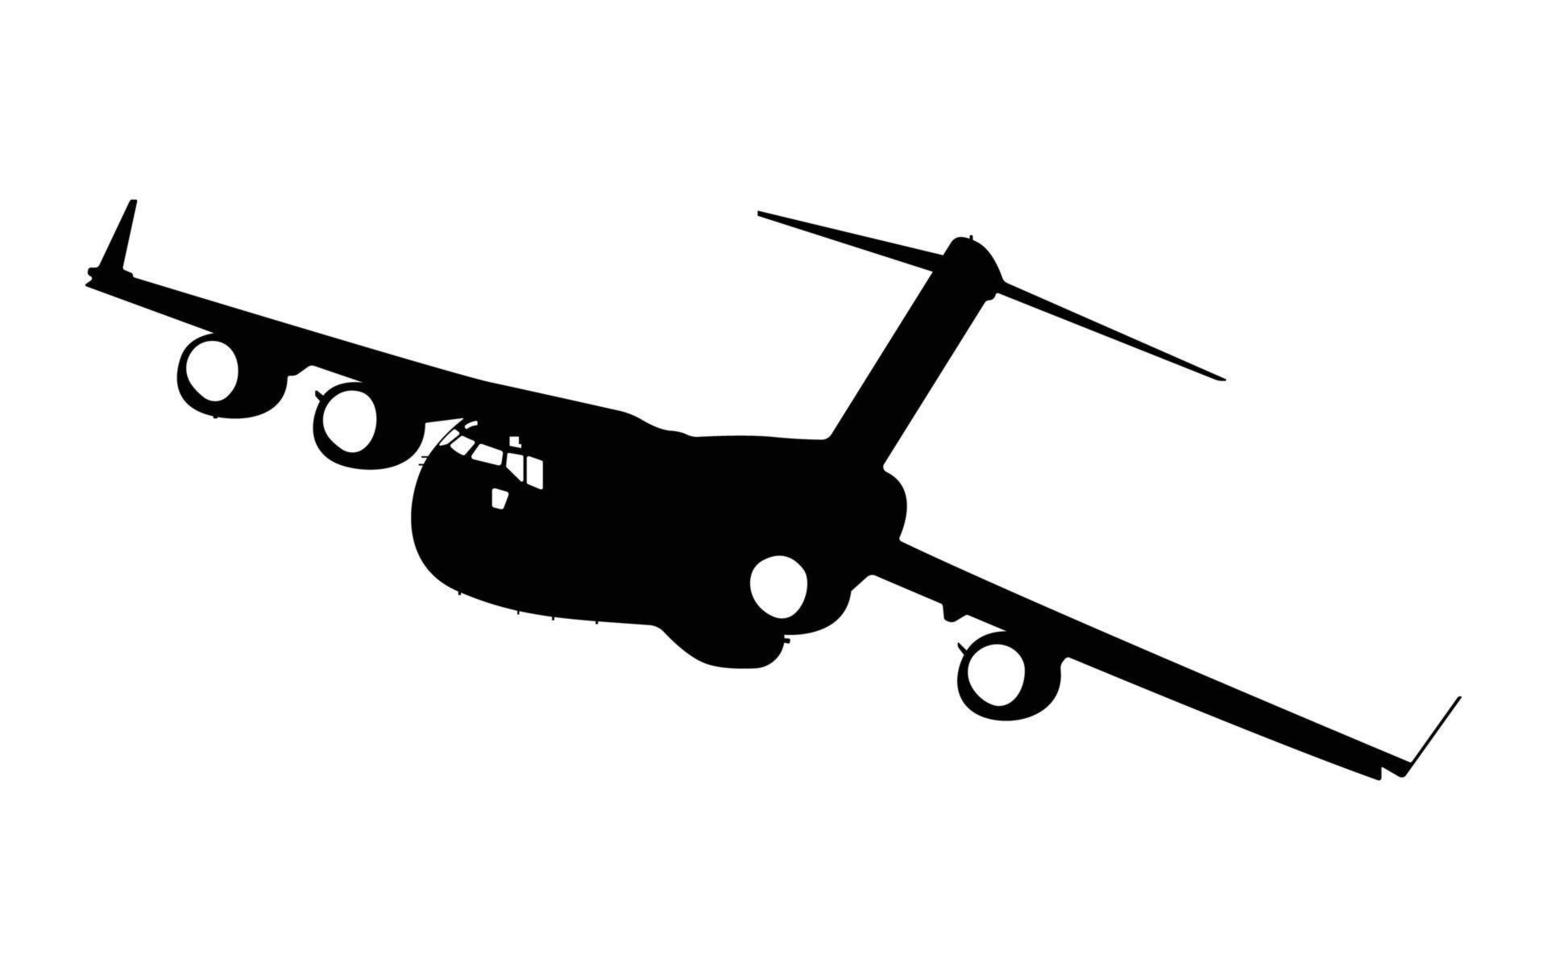 Military Transport Aircraft, Airlifter Silhouette, Army Cargo Jet aircraft vector